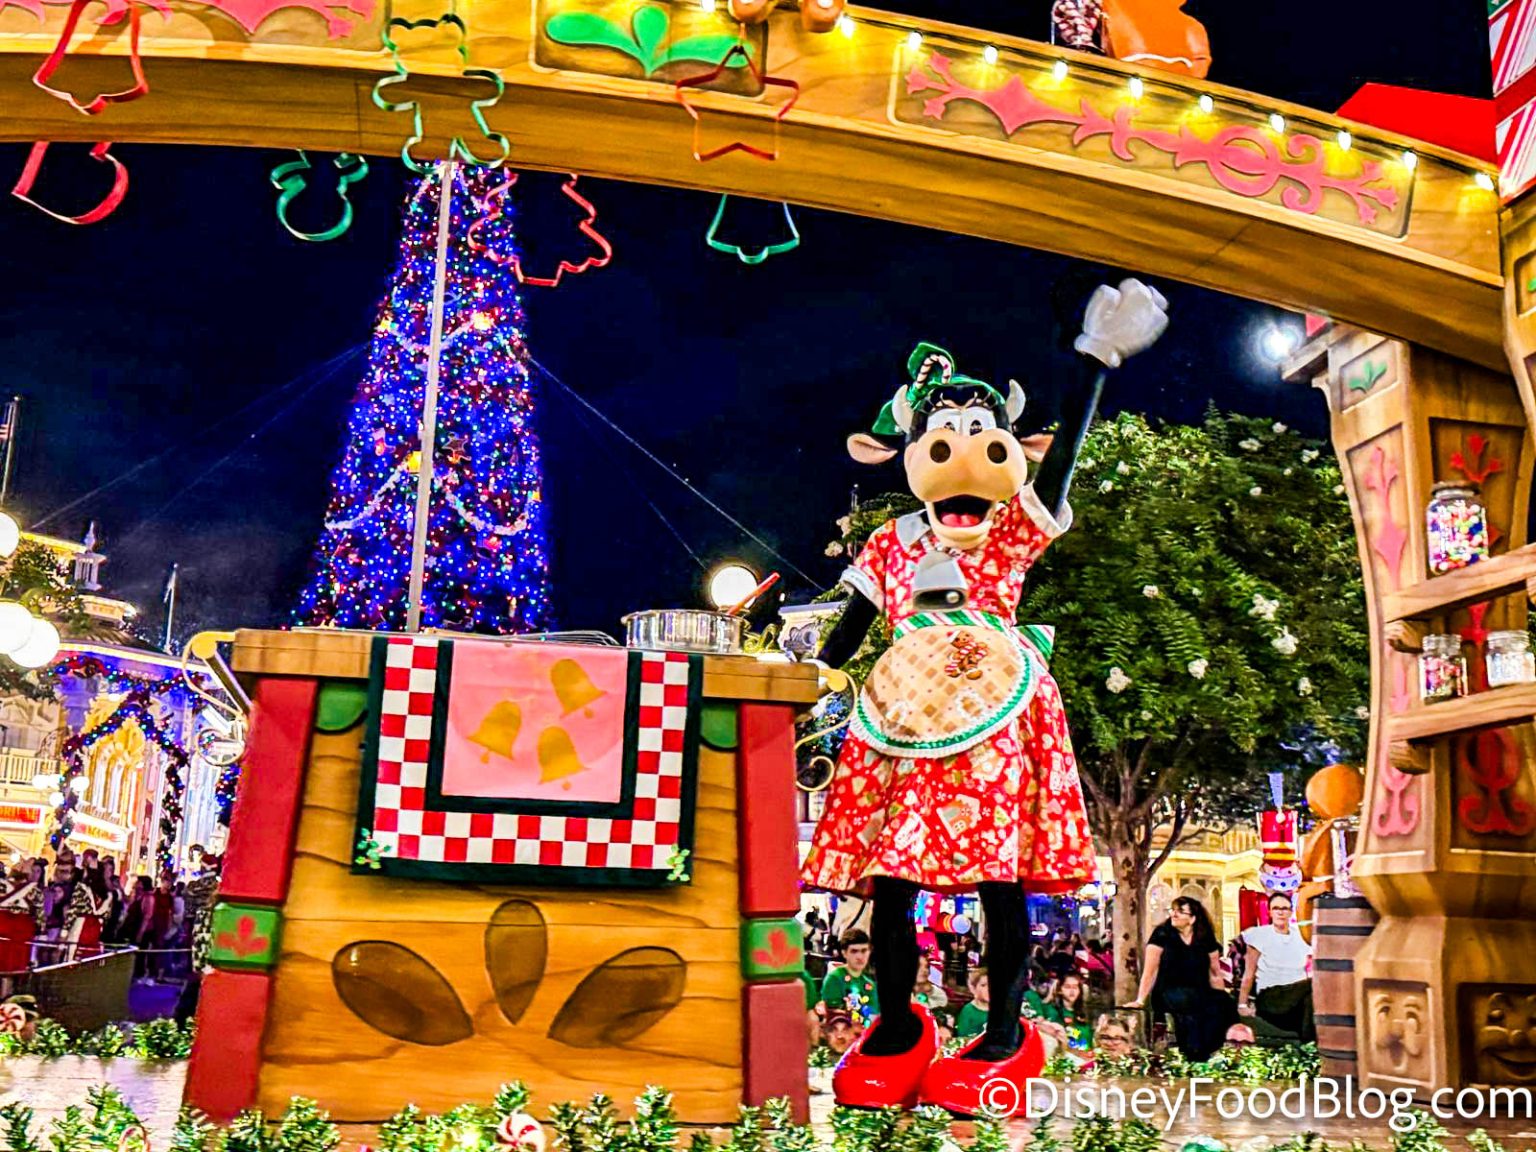 When Will Tickets Go On Sale for Mickey's Very Merry Christmas Party